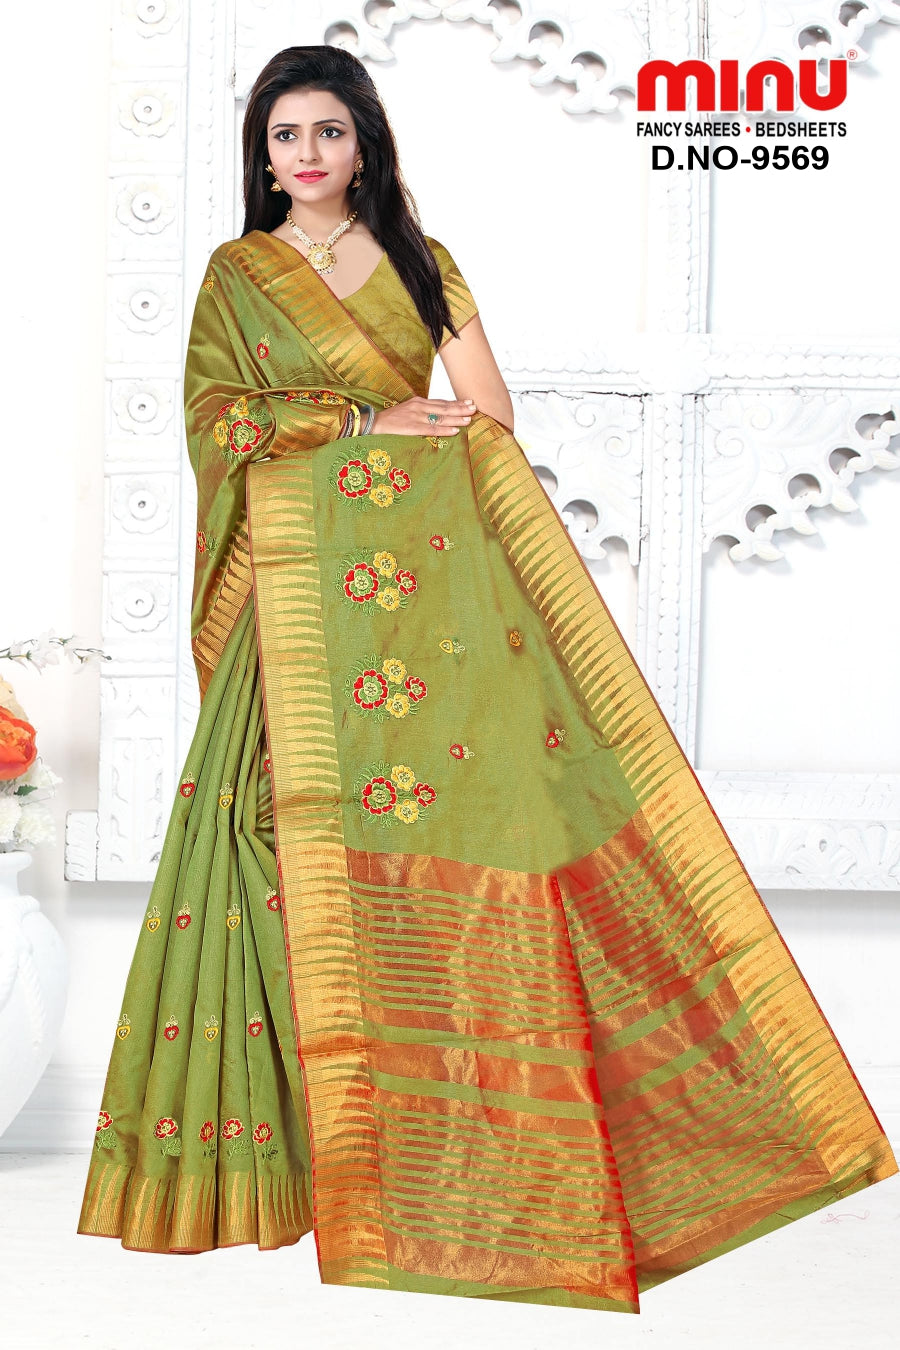 Woman wearing bold color fancy saree image